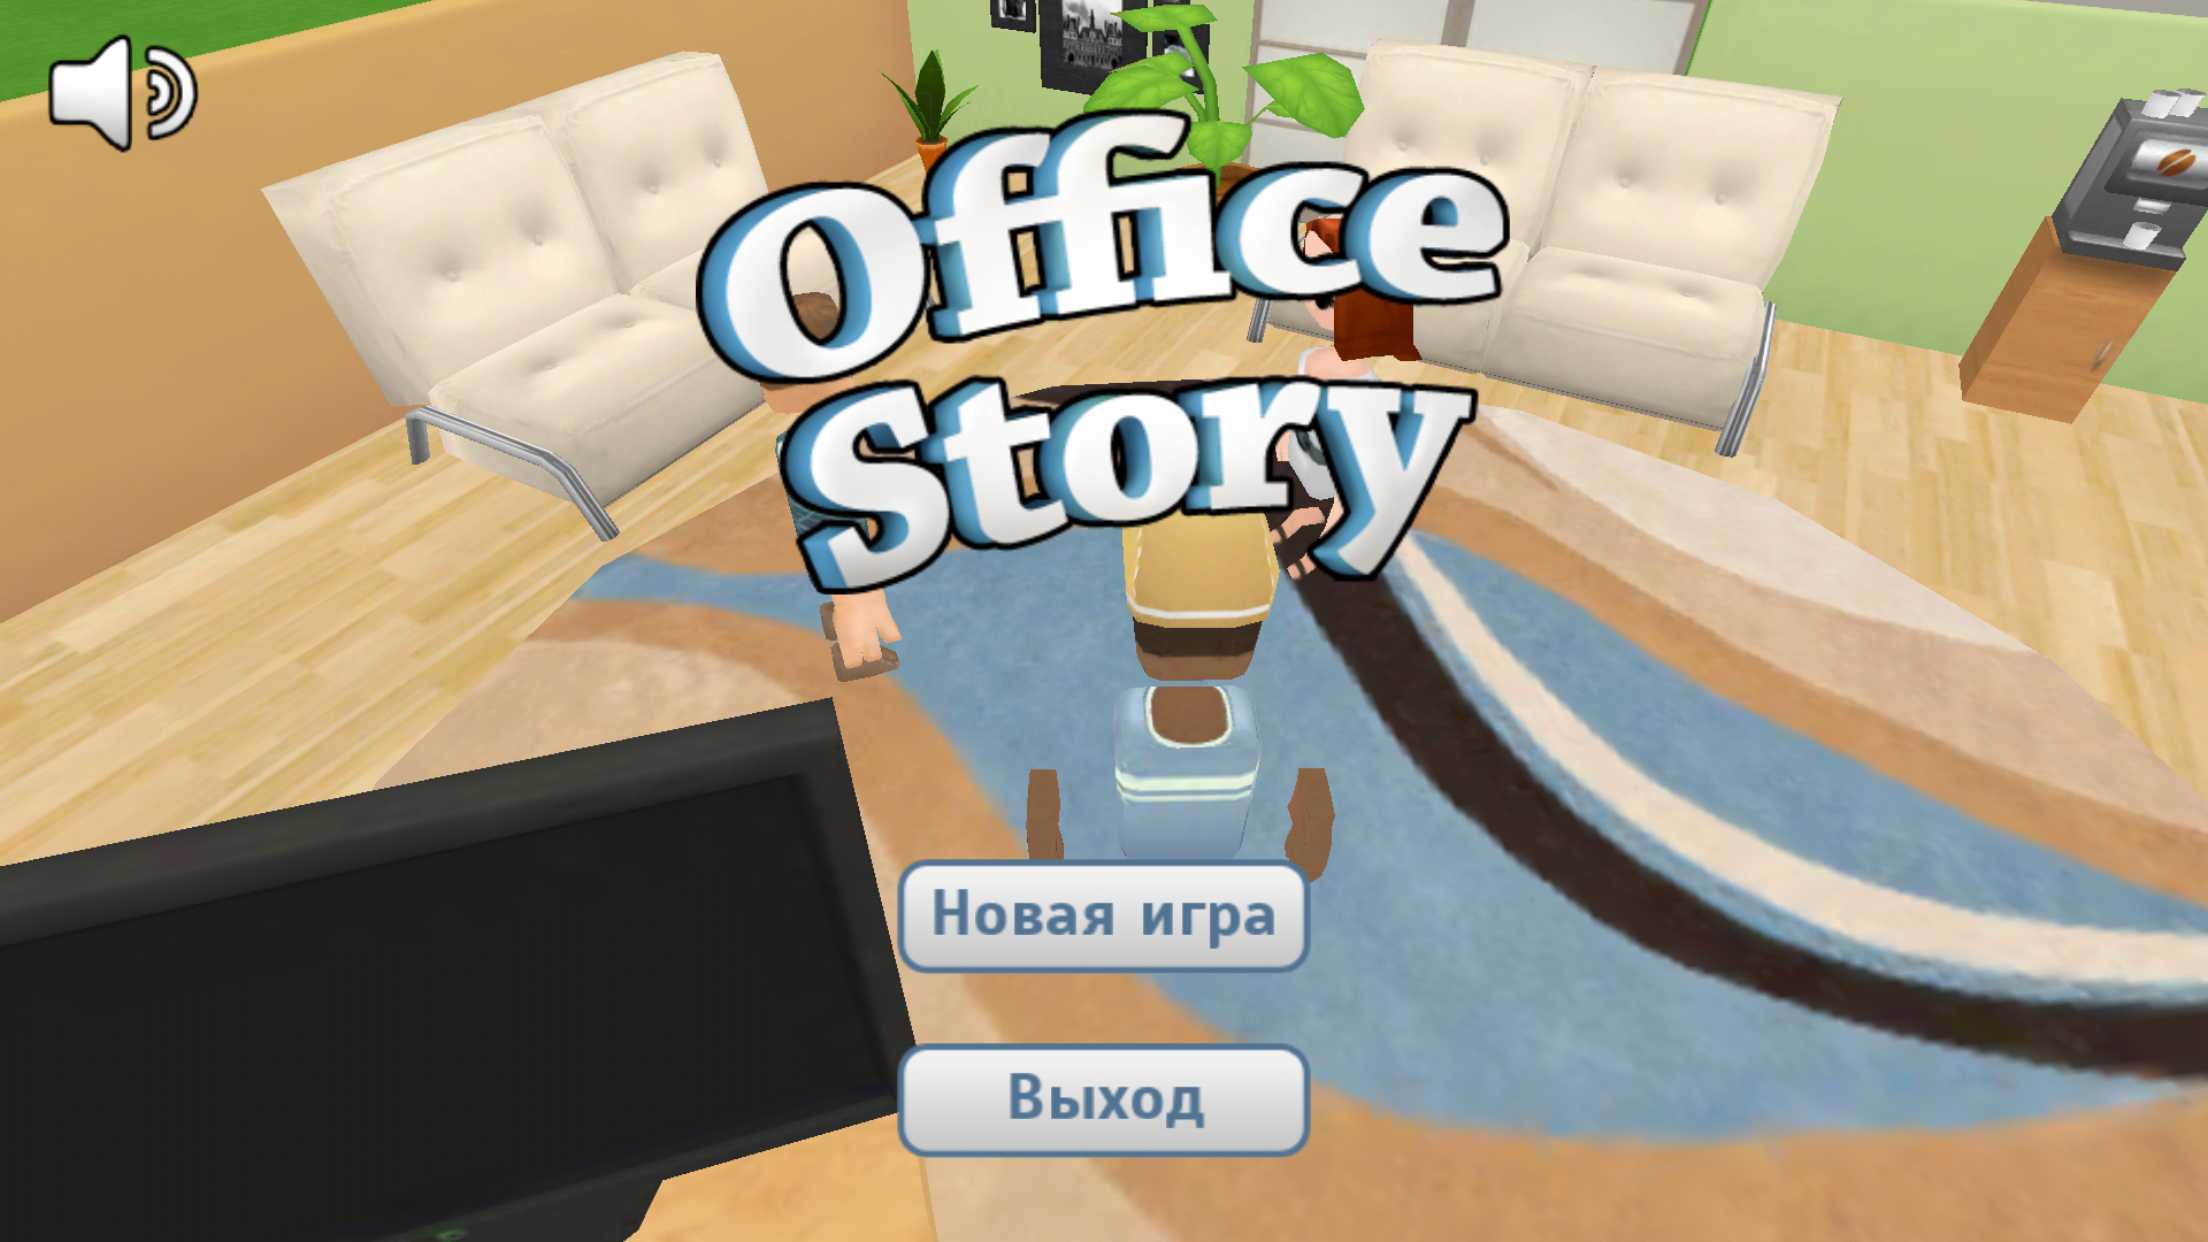 Long story game. Игра Office story. Андроид Office story. Continue the story game. IOS Hack.